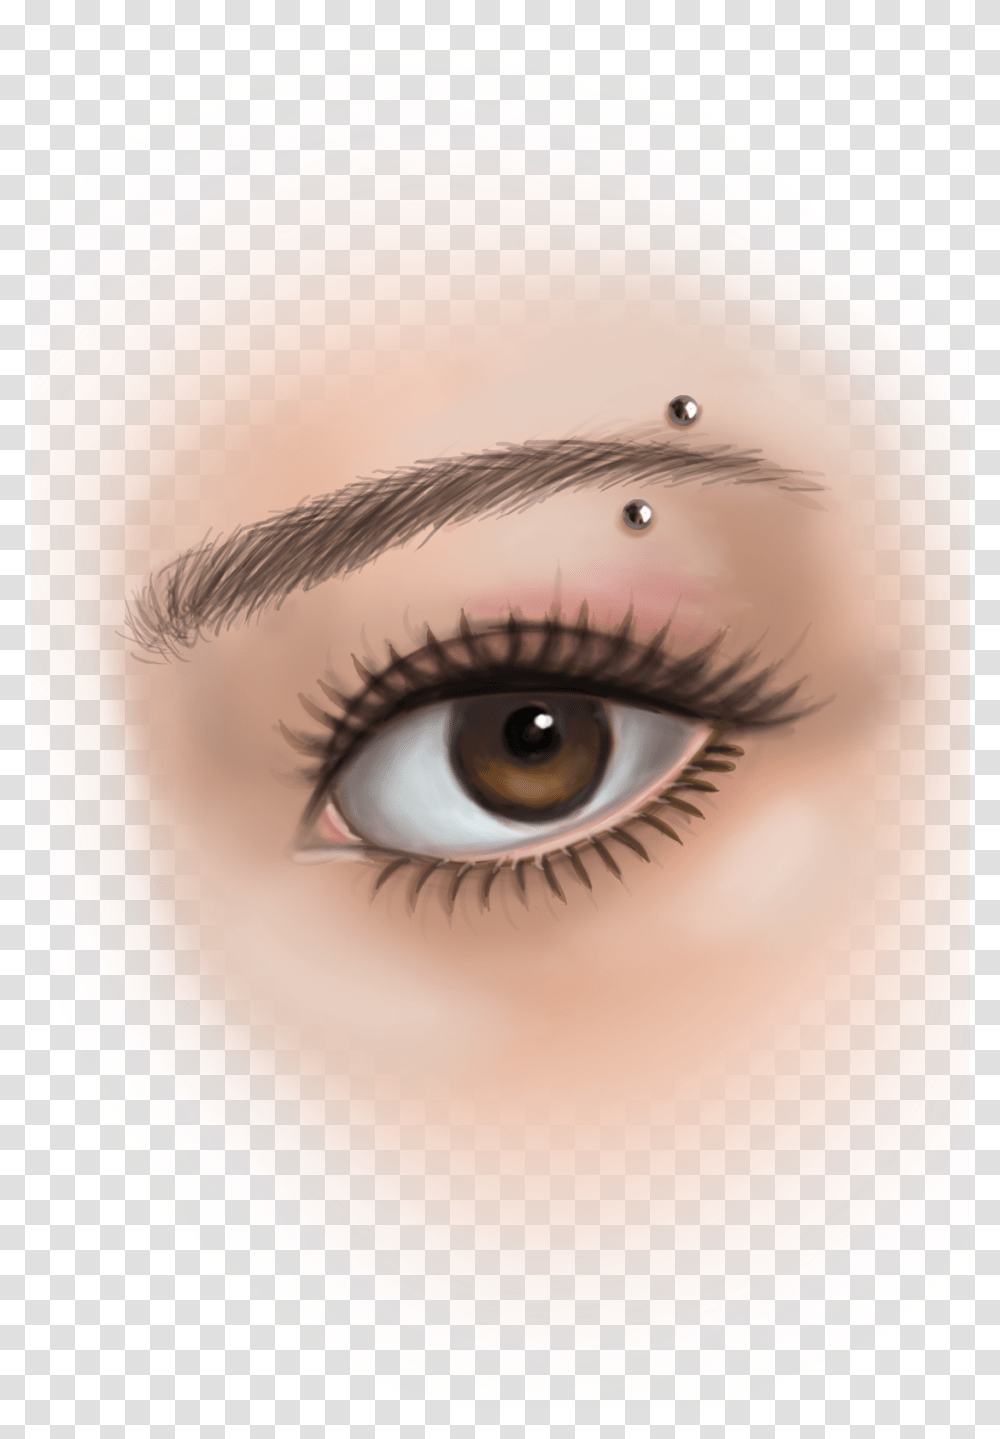 Safe Eyebrow Piercing Contact Https Eye Liner, Doll, Toy, Contact Lens Transparent Png